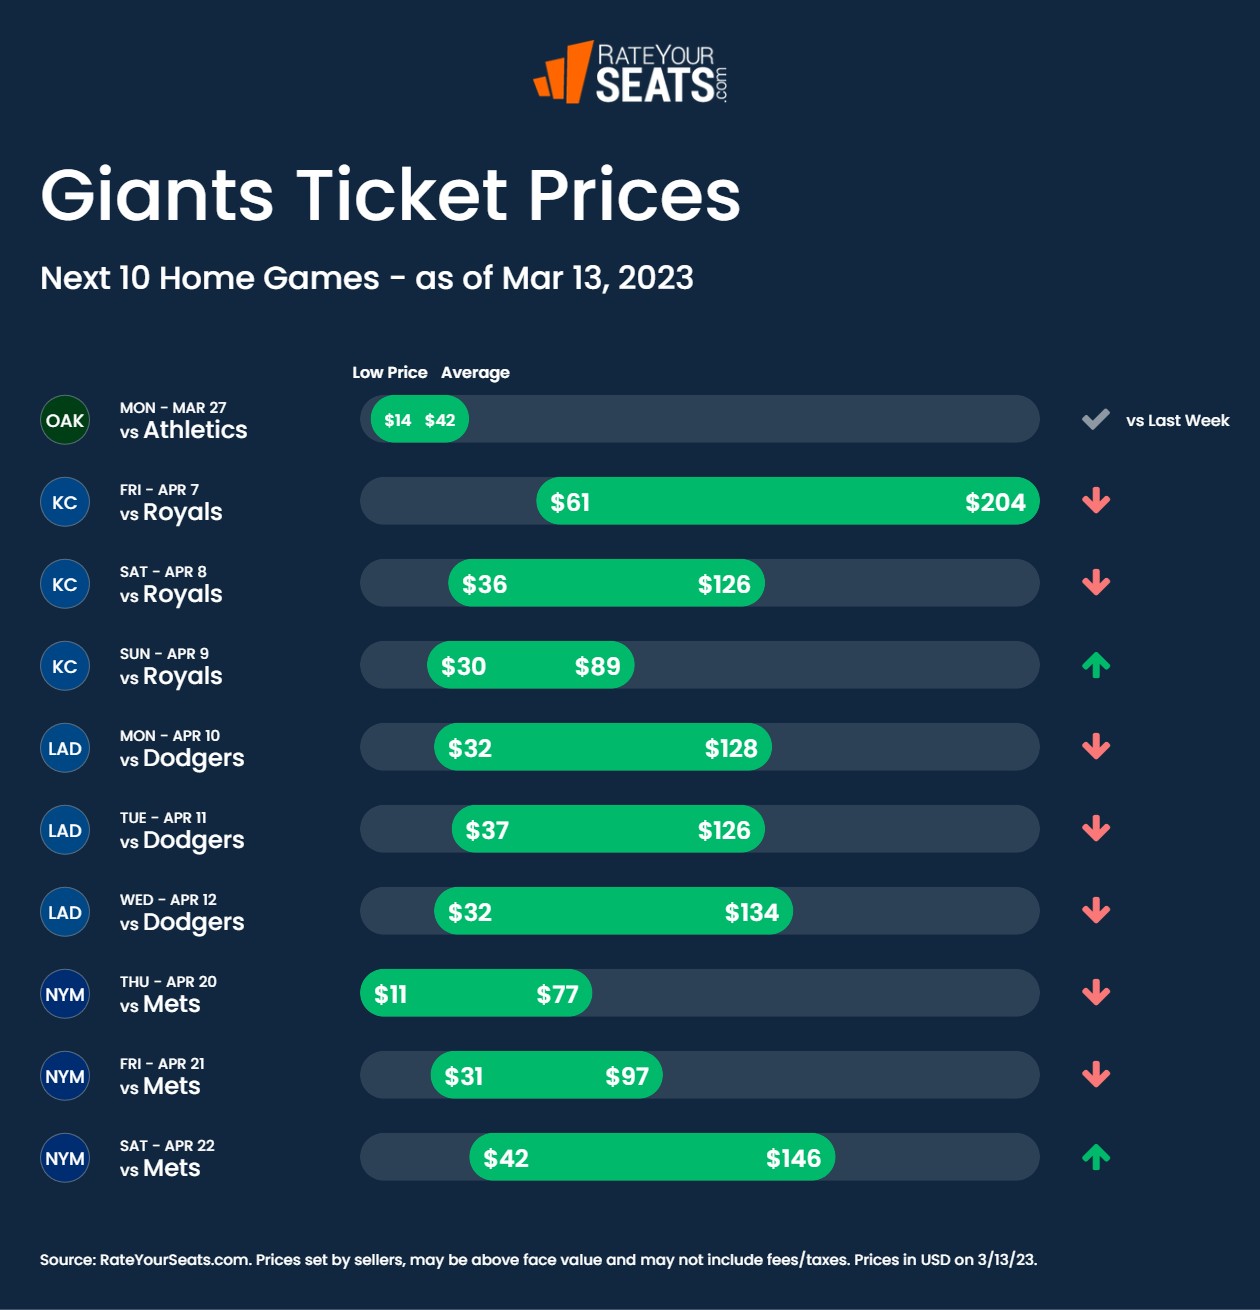 Giants tickets pricing week of March 13 2023